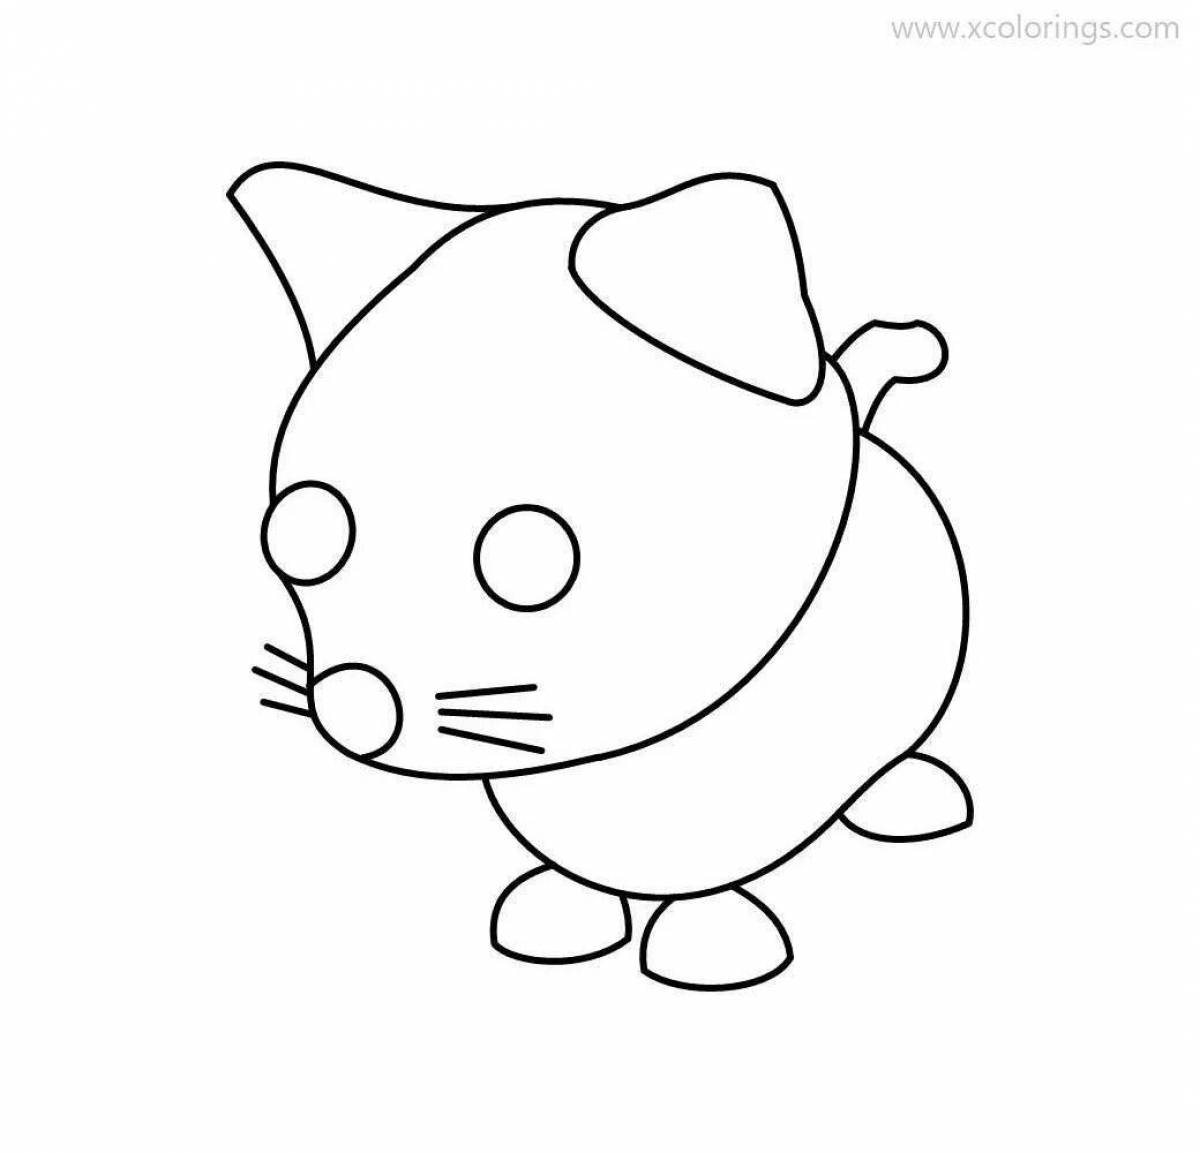 Amazing adopt me pets coloring page